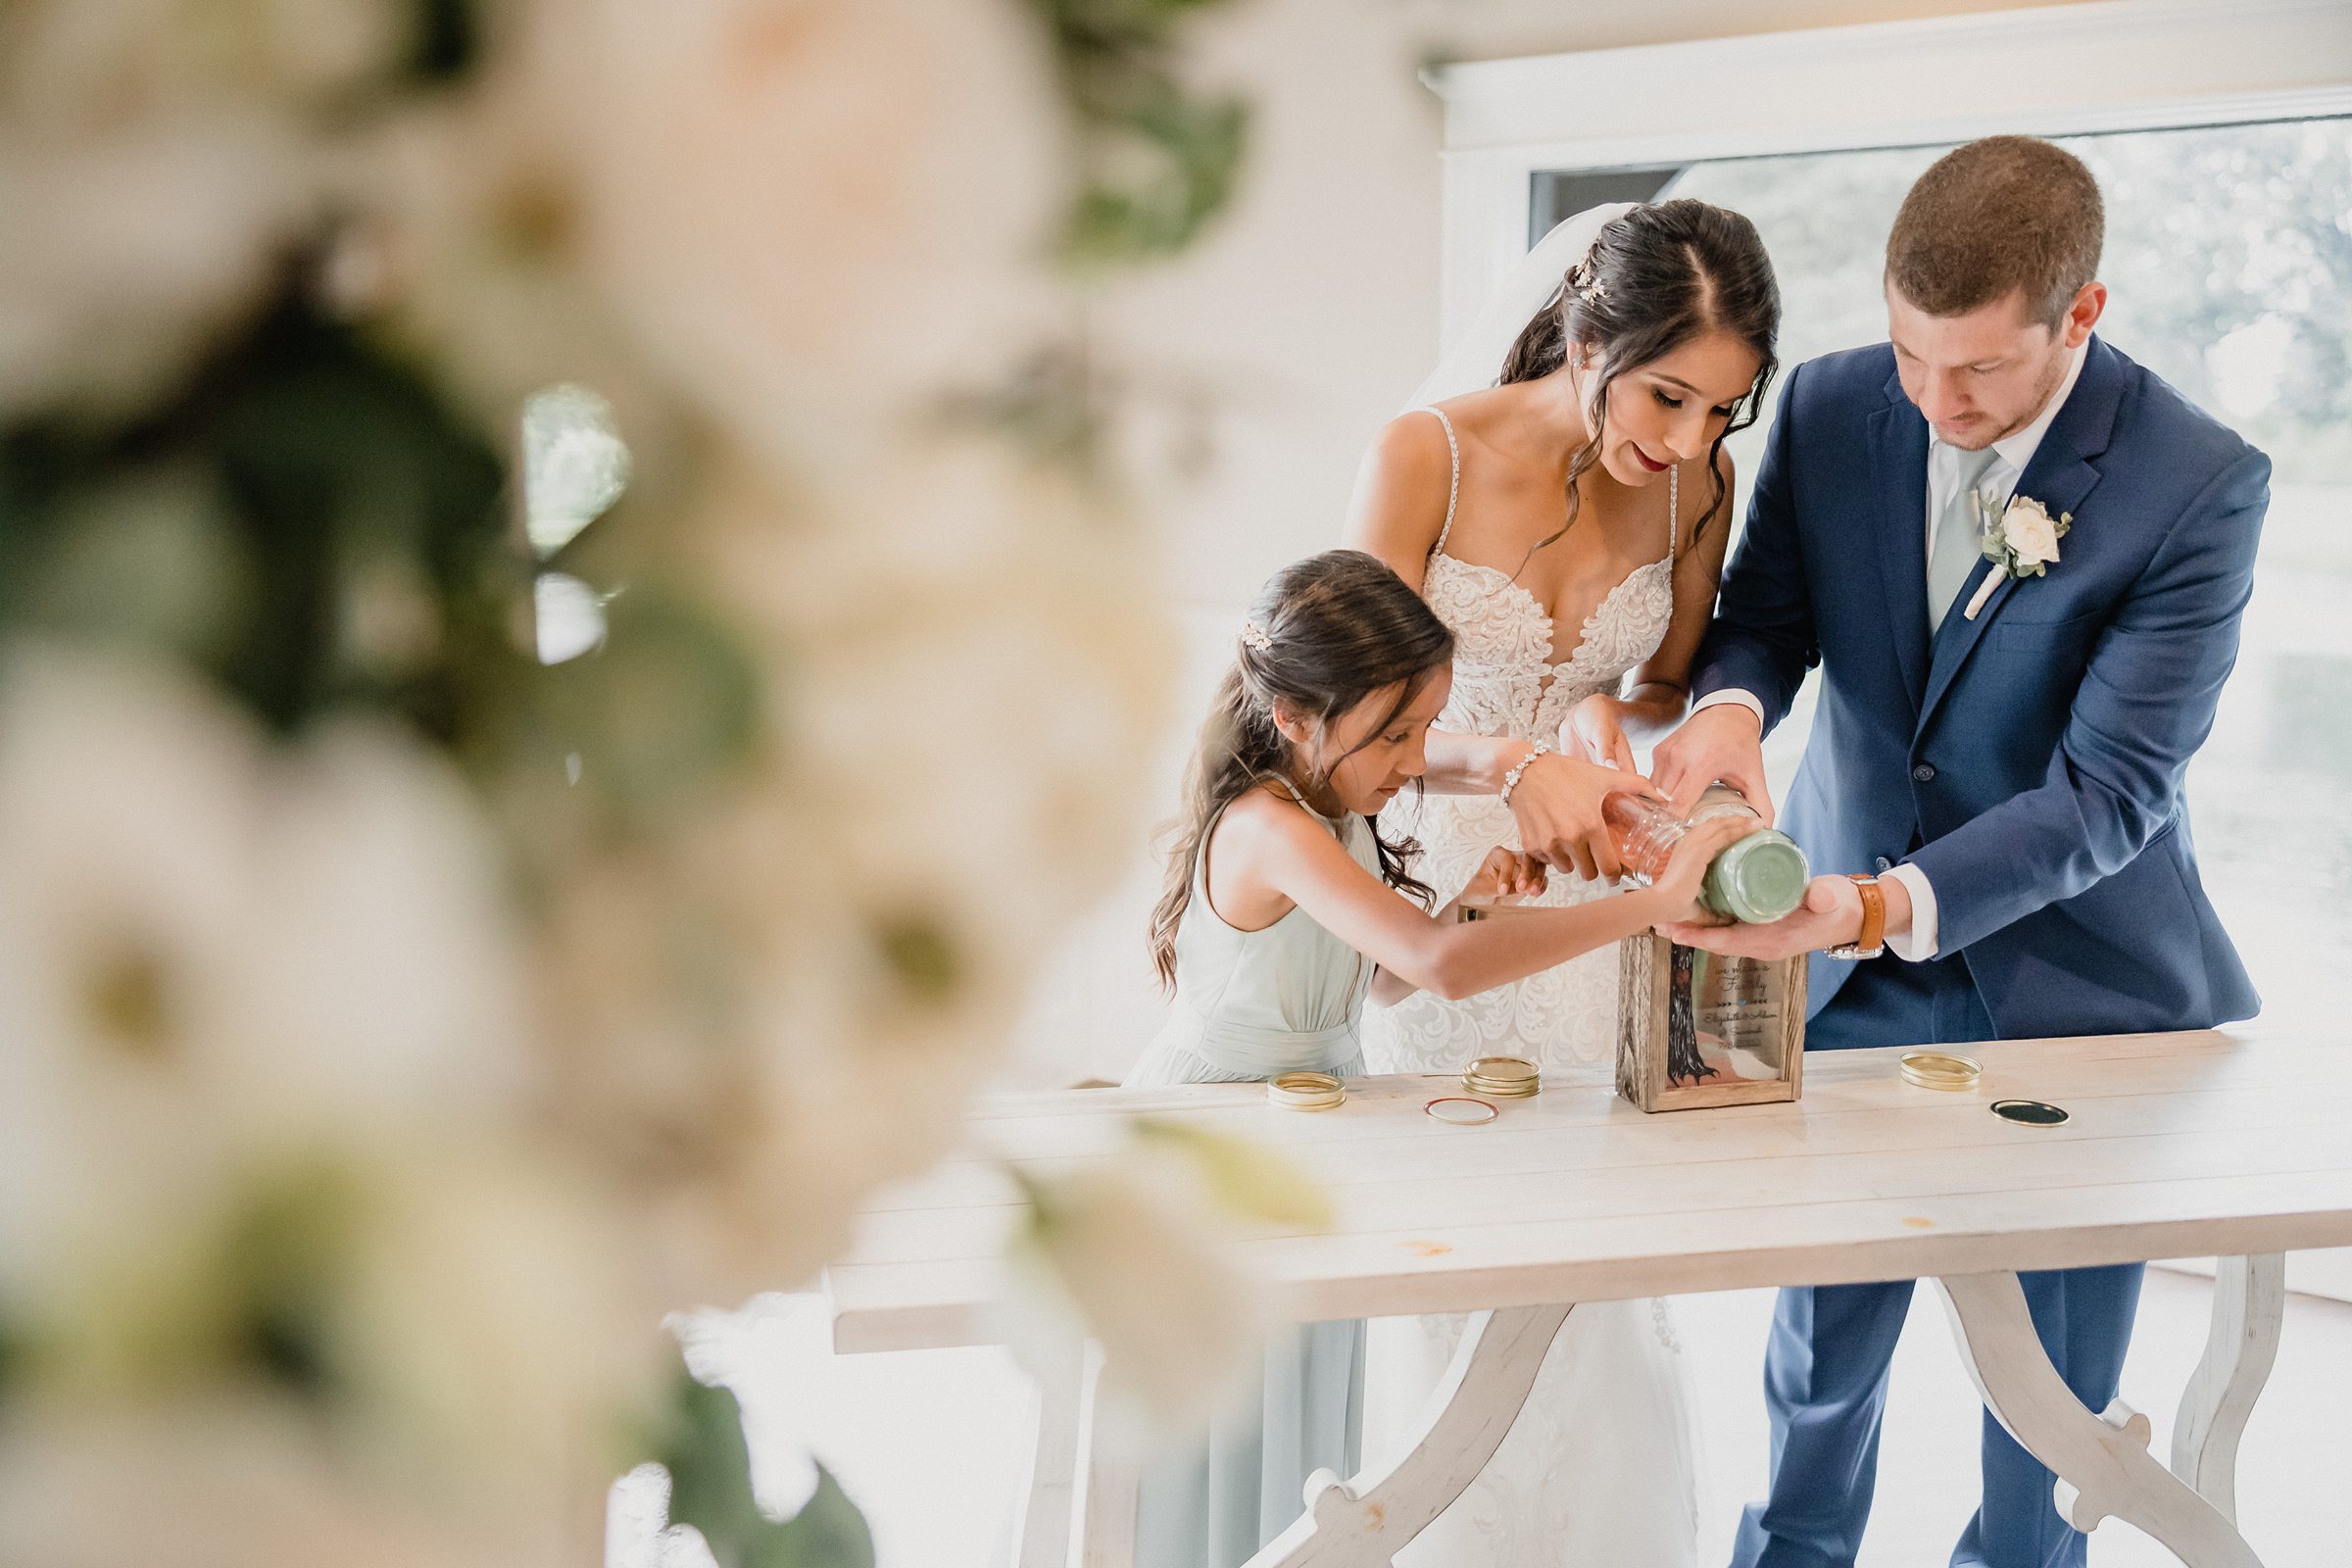 Groom, bride, and her daughter pour unity sand together during a wedding at the Fisherman's Inn in Elburn, Illinois.